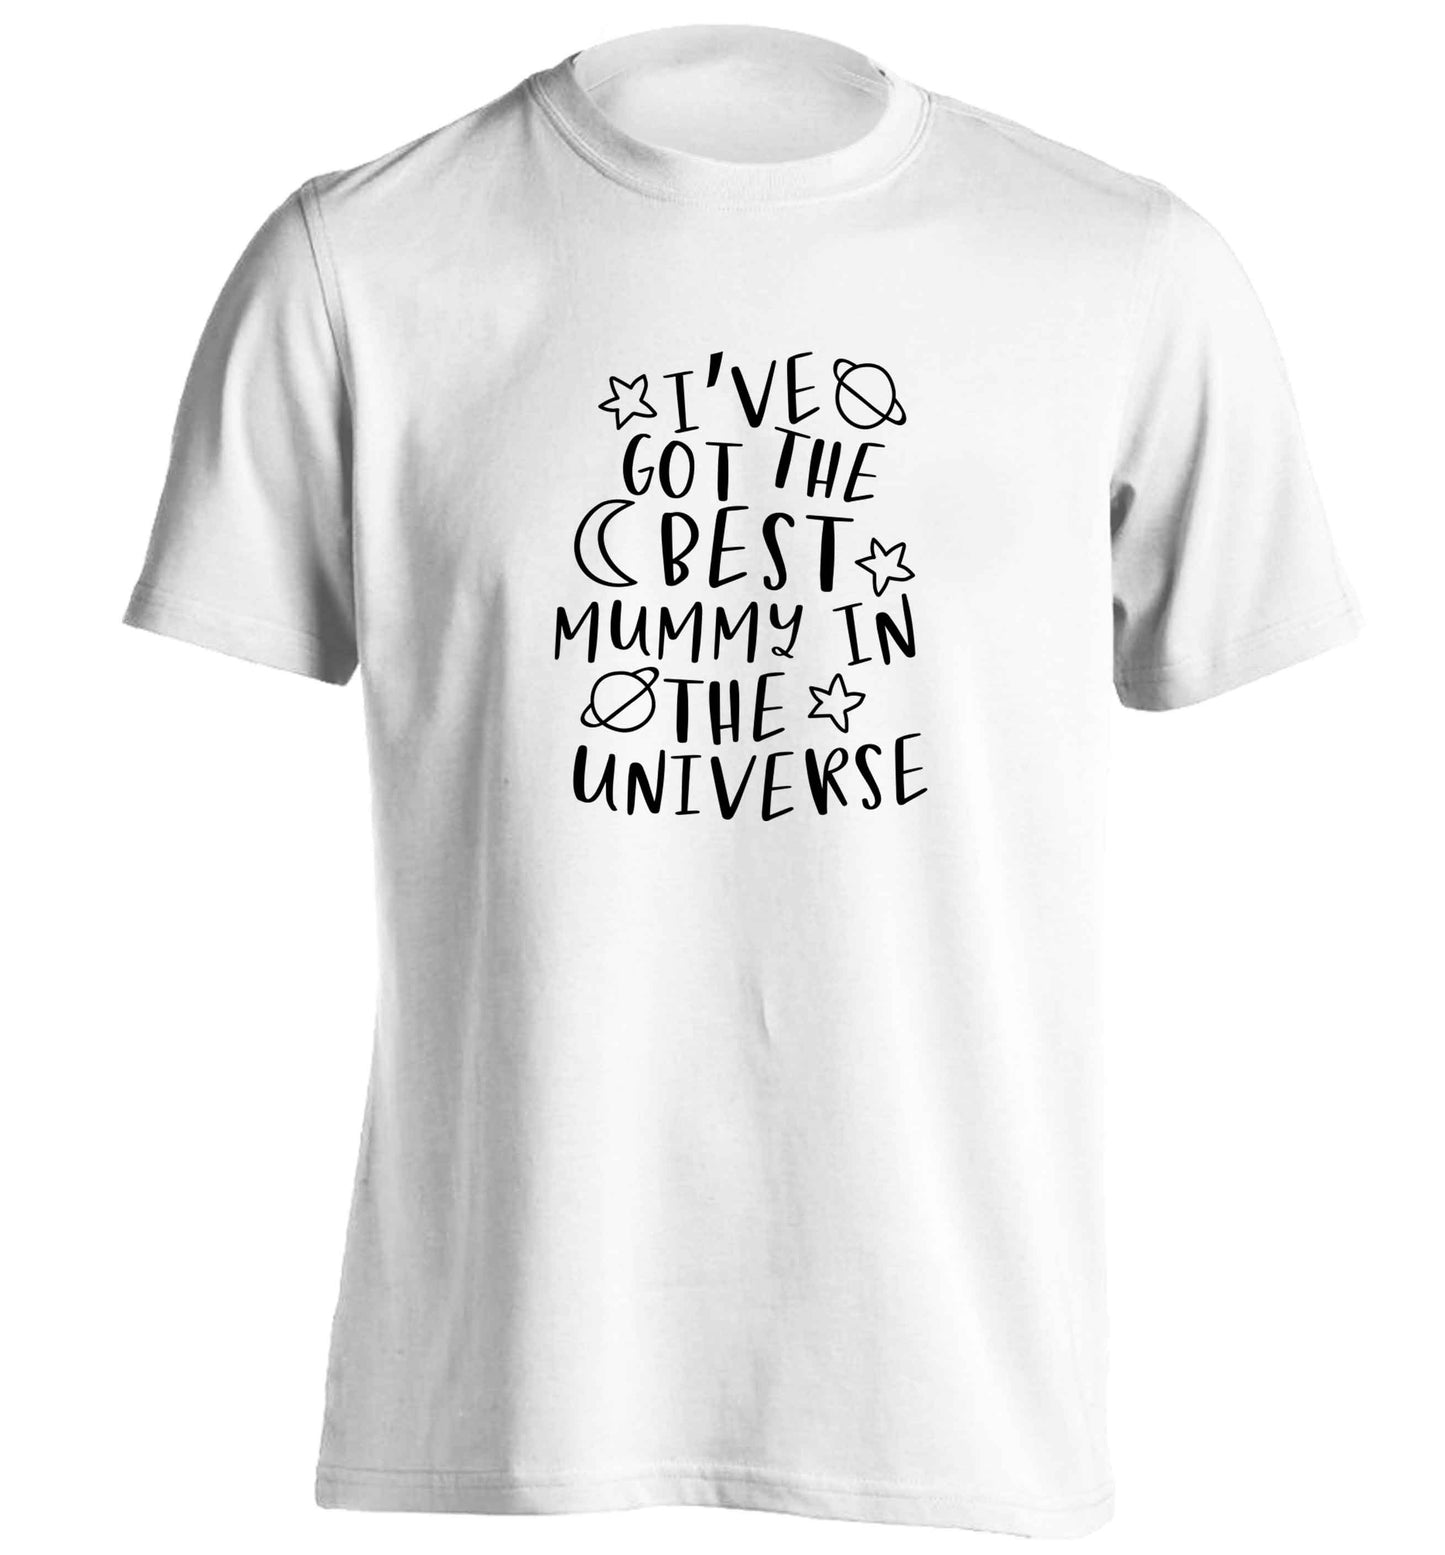 I've got the best mummy in the universe adults unisex white Tshirt 2XL